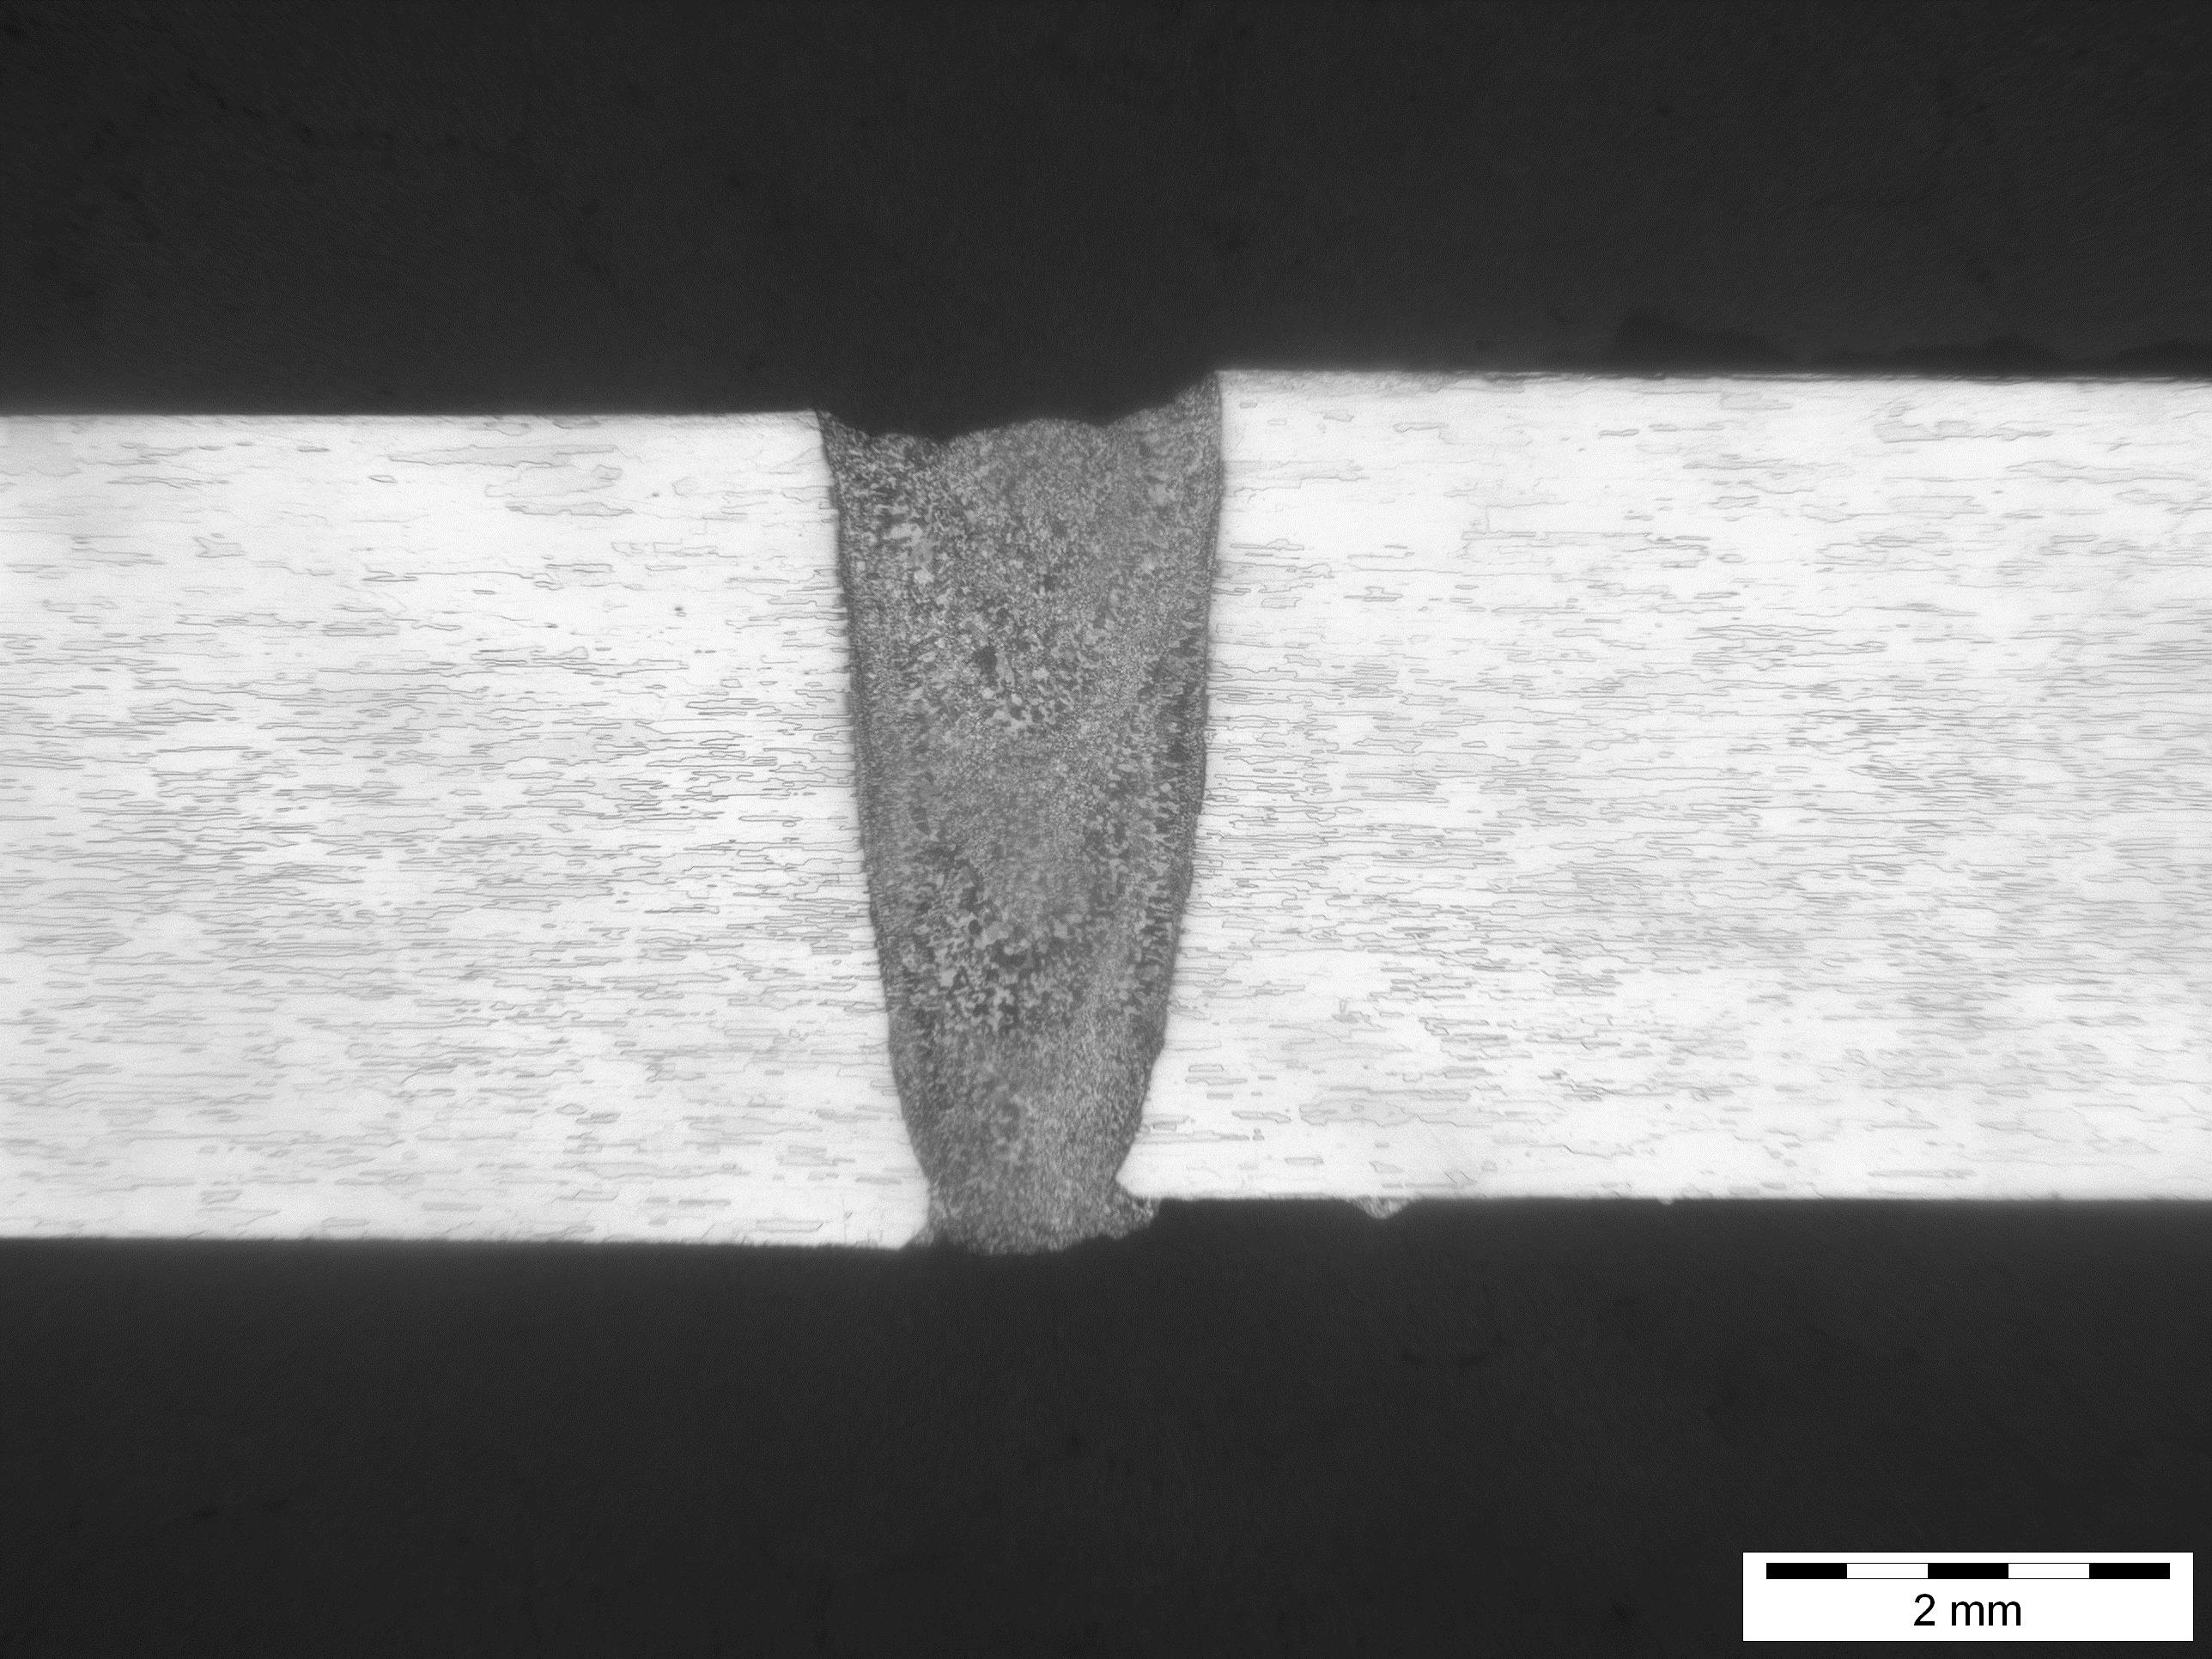 Figure 6a: Transverse metallographic sections cut through EBW sample AA2060 alloy T3 condition